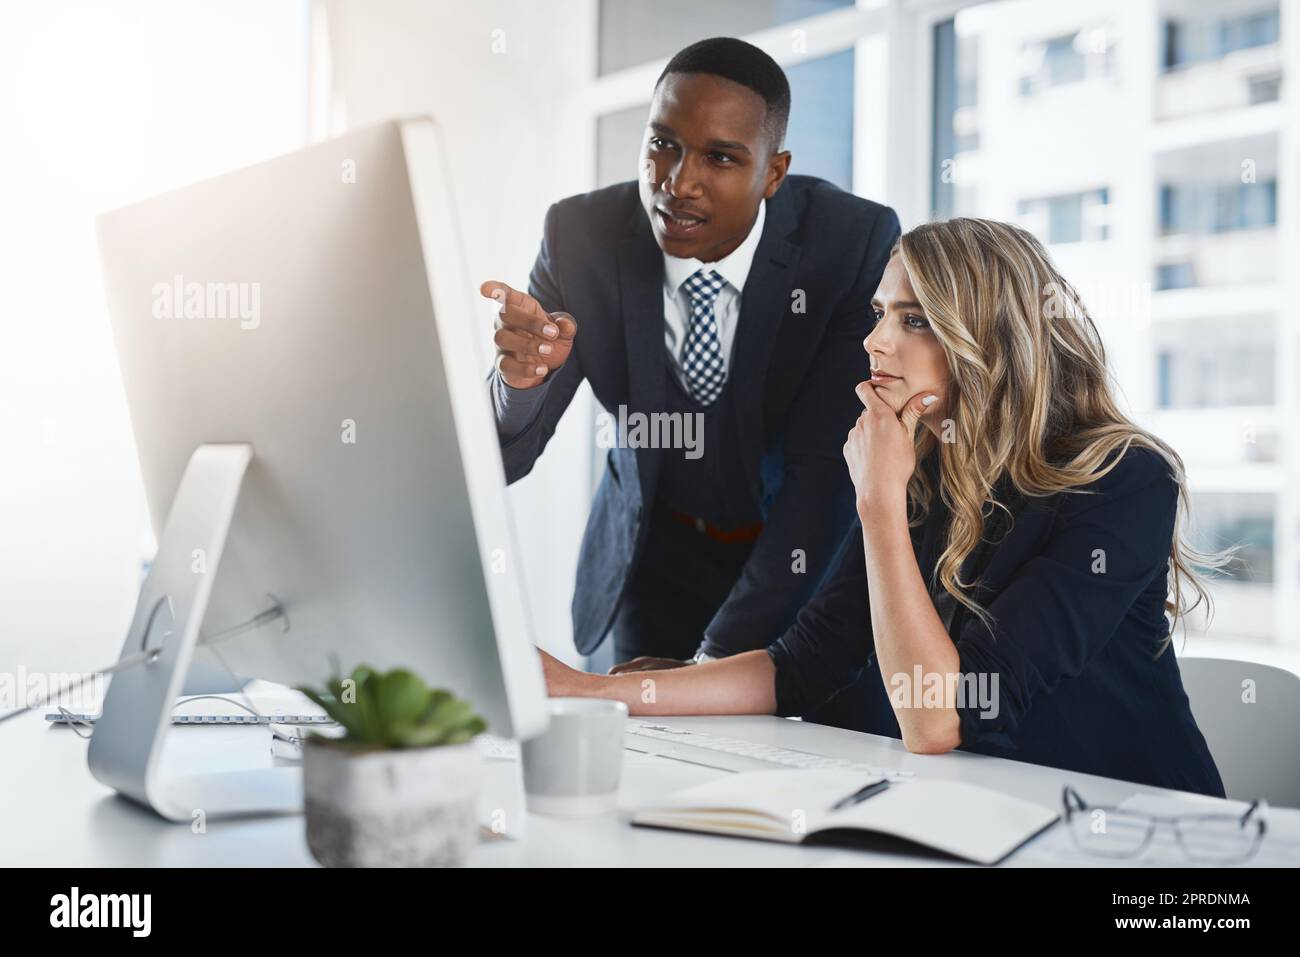 This might be a way of rapidly boosting our profits. two businesspeople working together in an office. Stock Photo